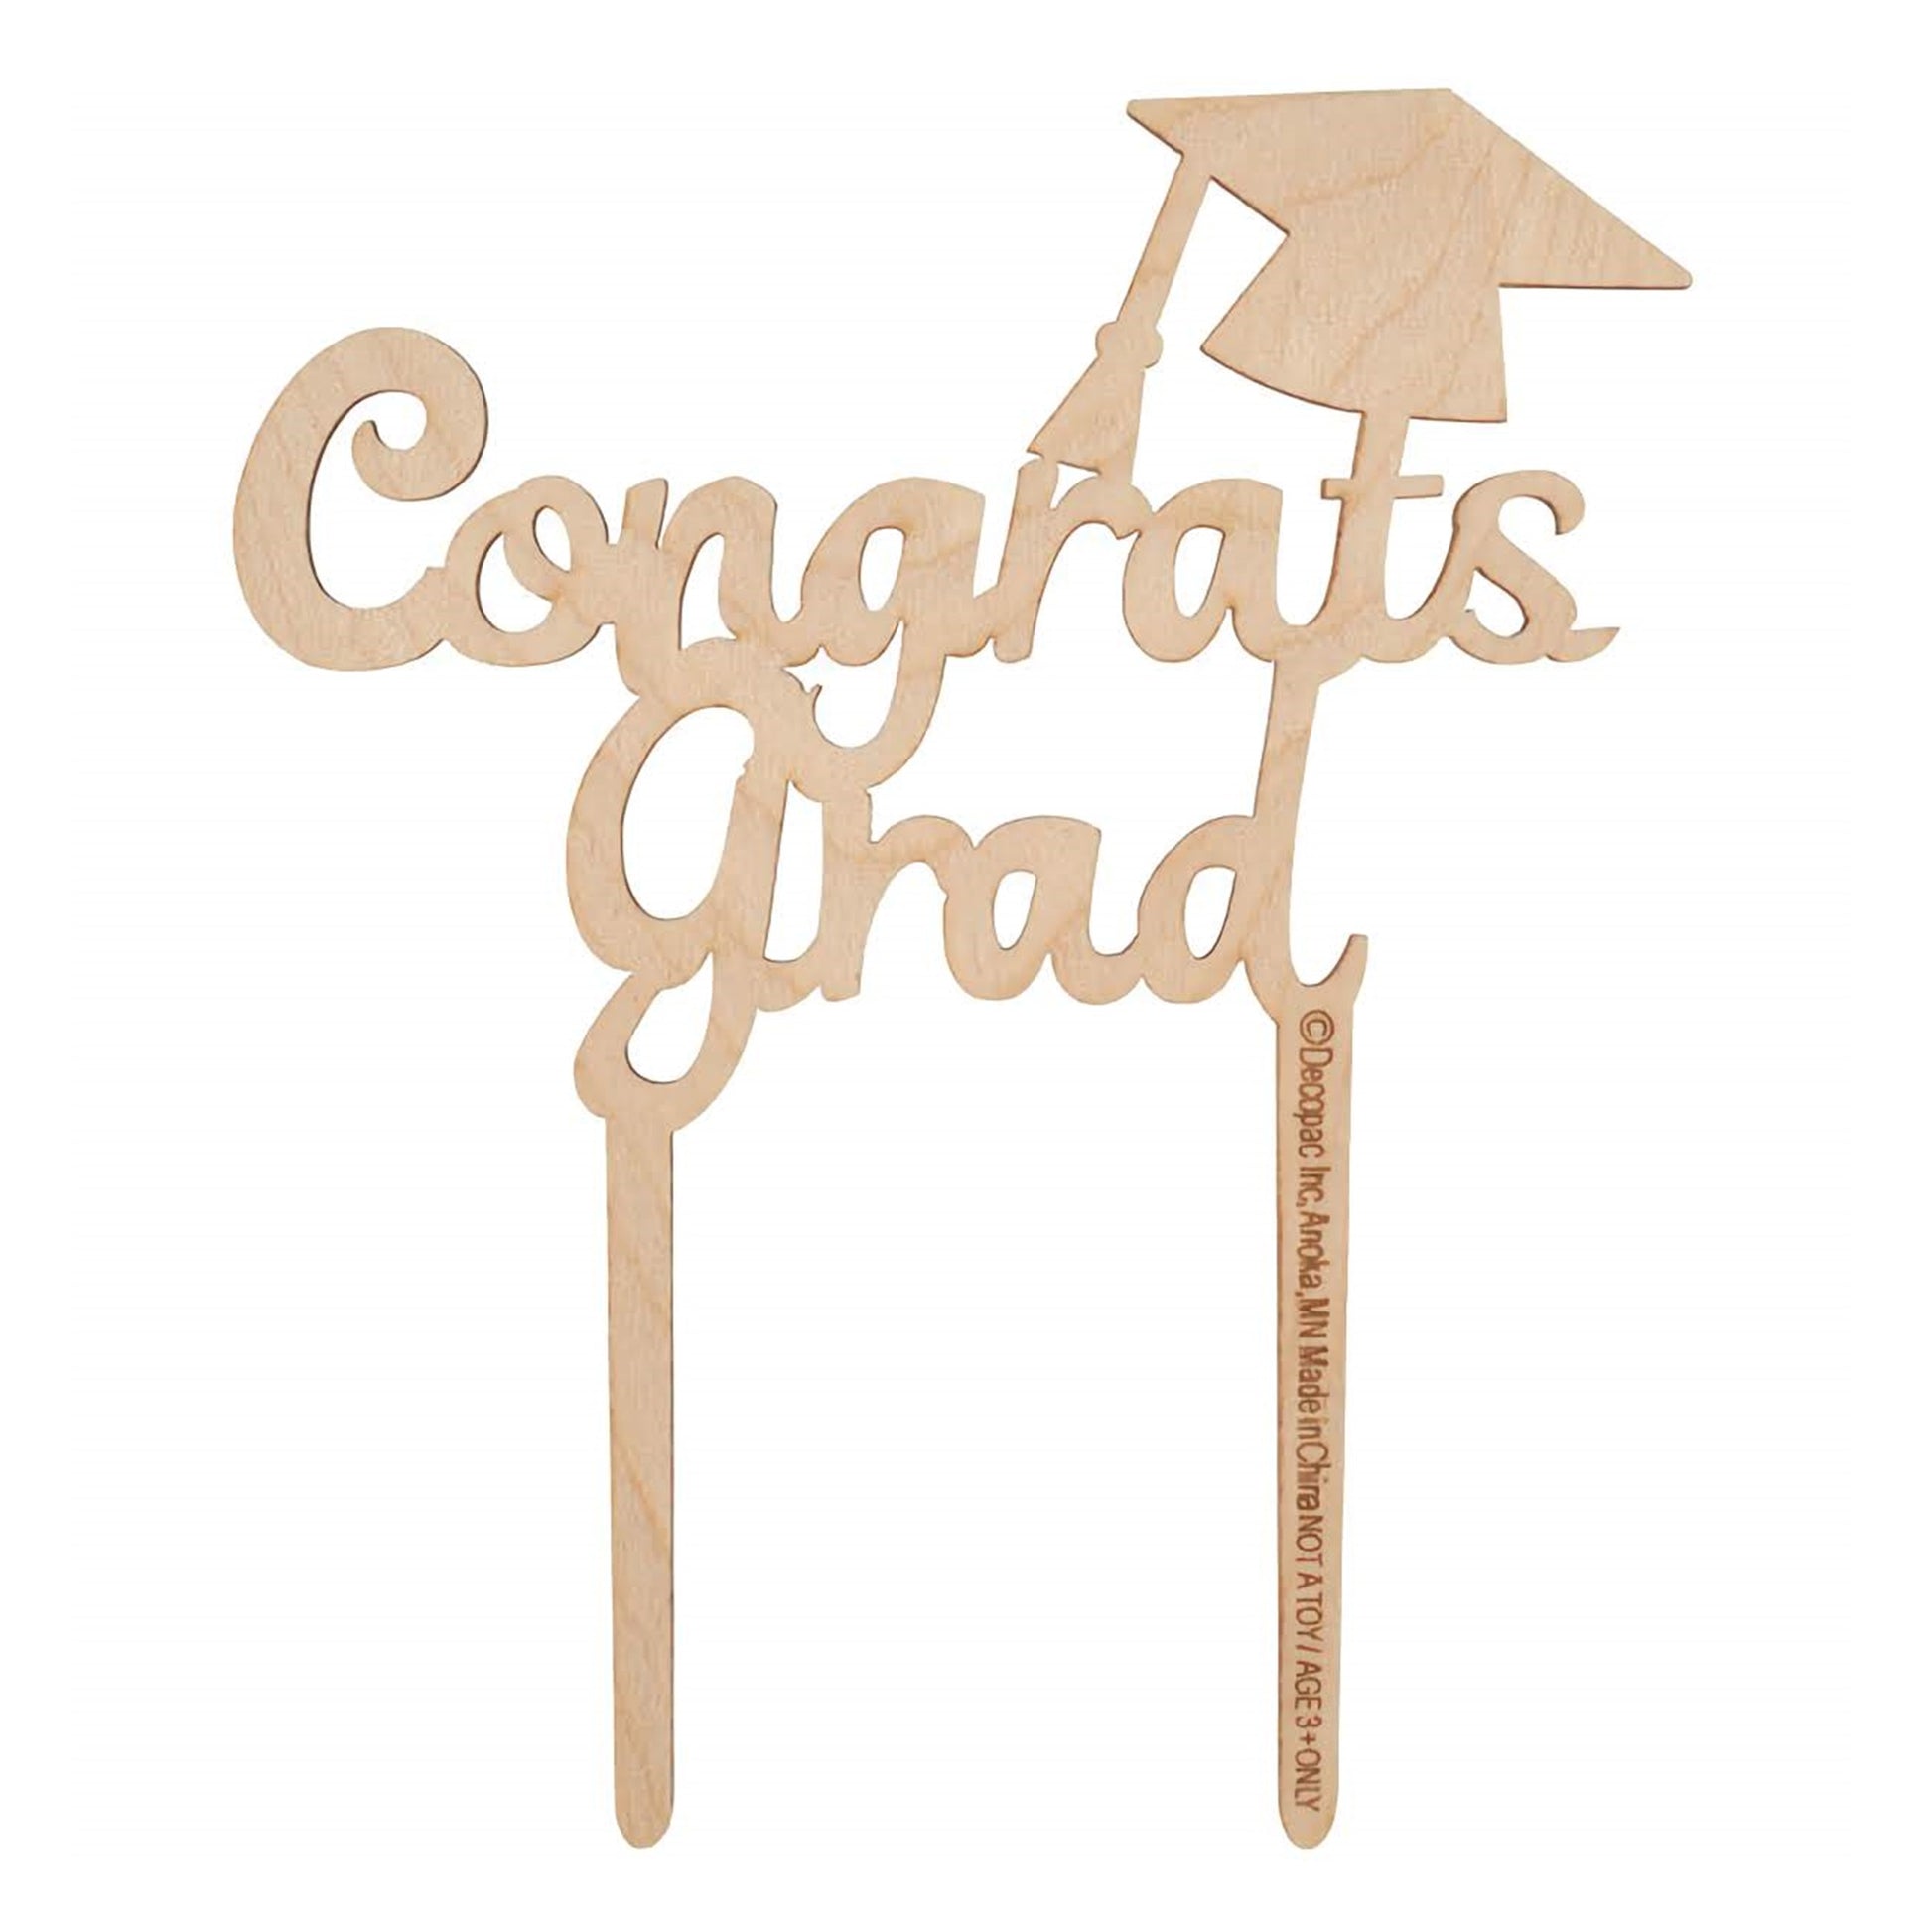 A wooden cake topper pick that reads 'Congrats Grad' in a flowing script, complete with a graduation cap accent, offering a classic and elegant finish for a graduation cake.